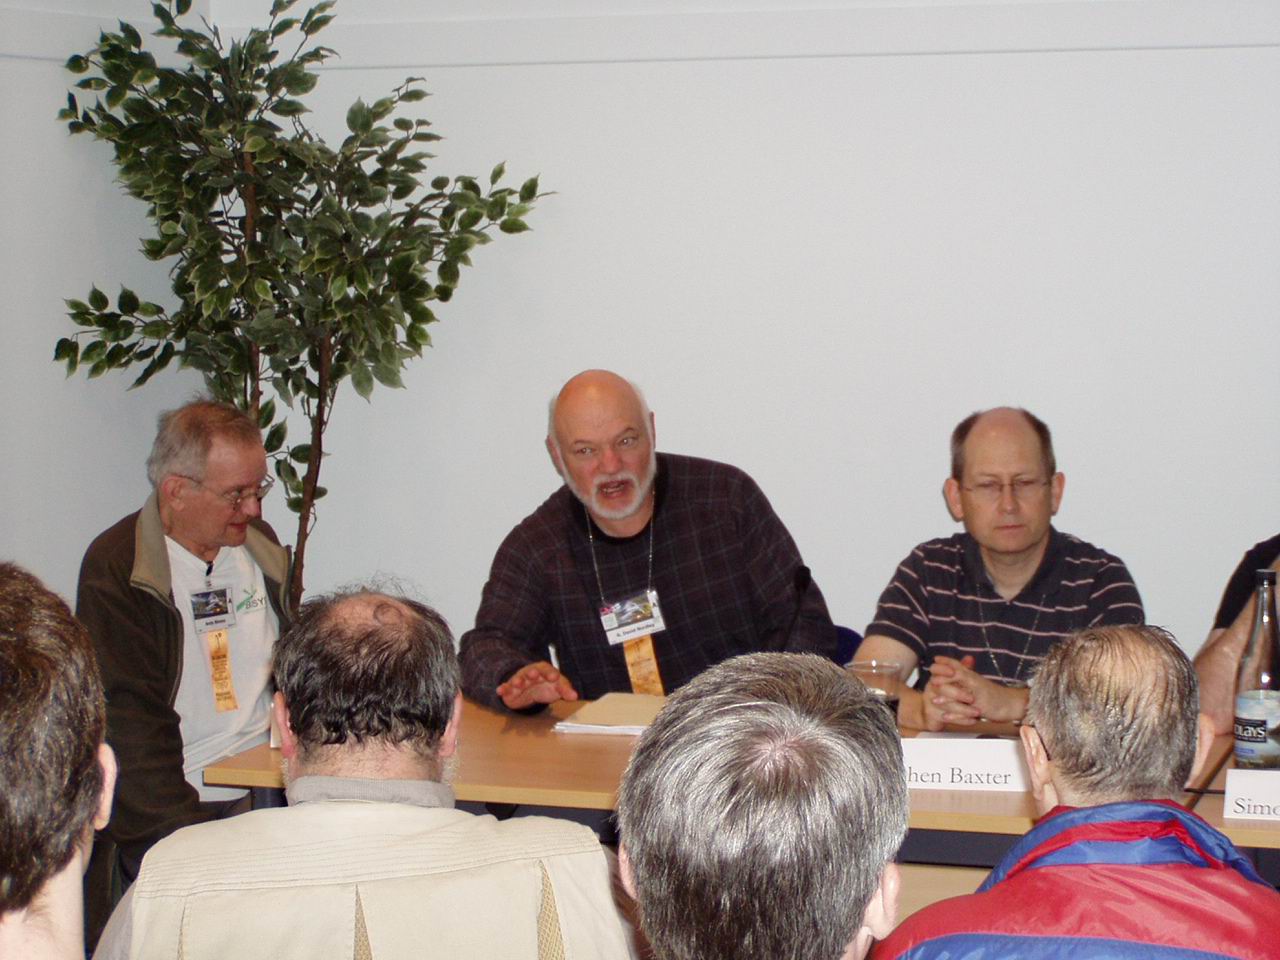 Andrew Nimmo, G. David Nordley, Stephen Baxter („The End of Space Age?”)